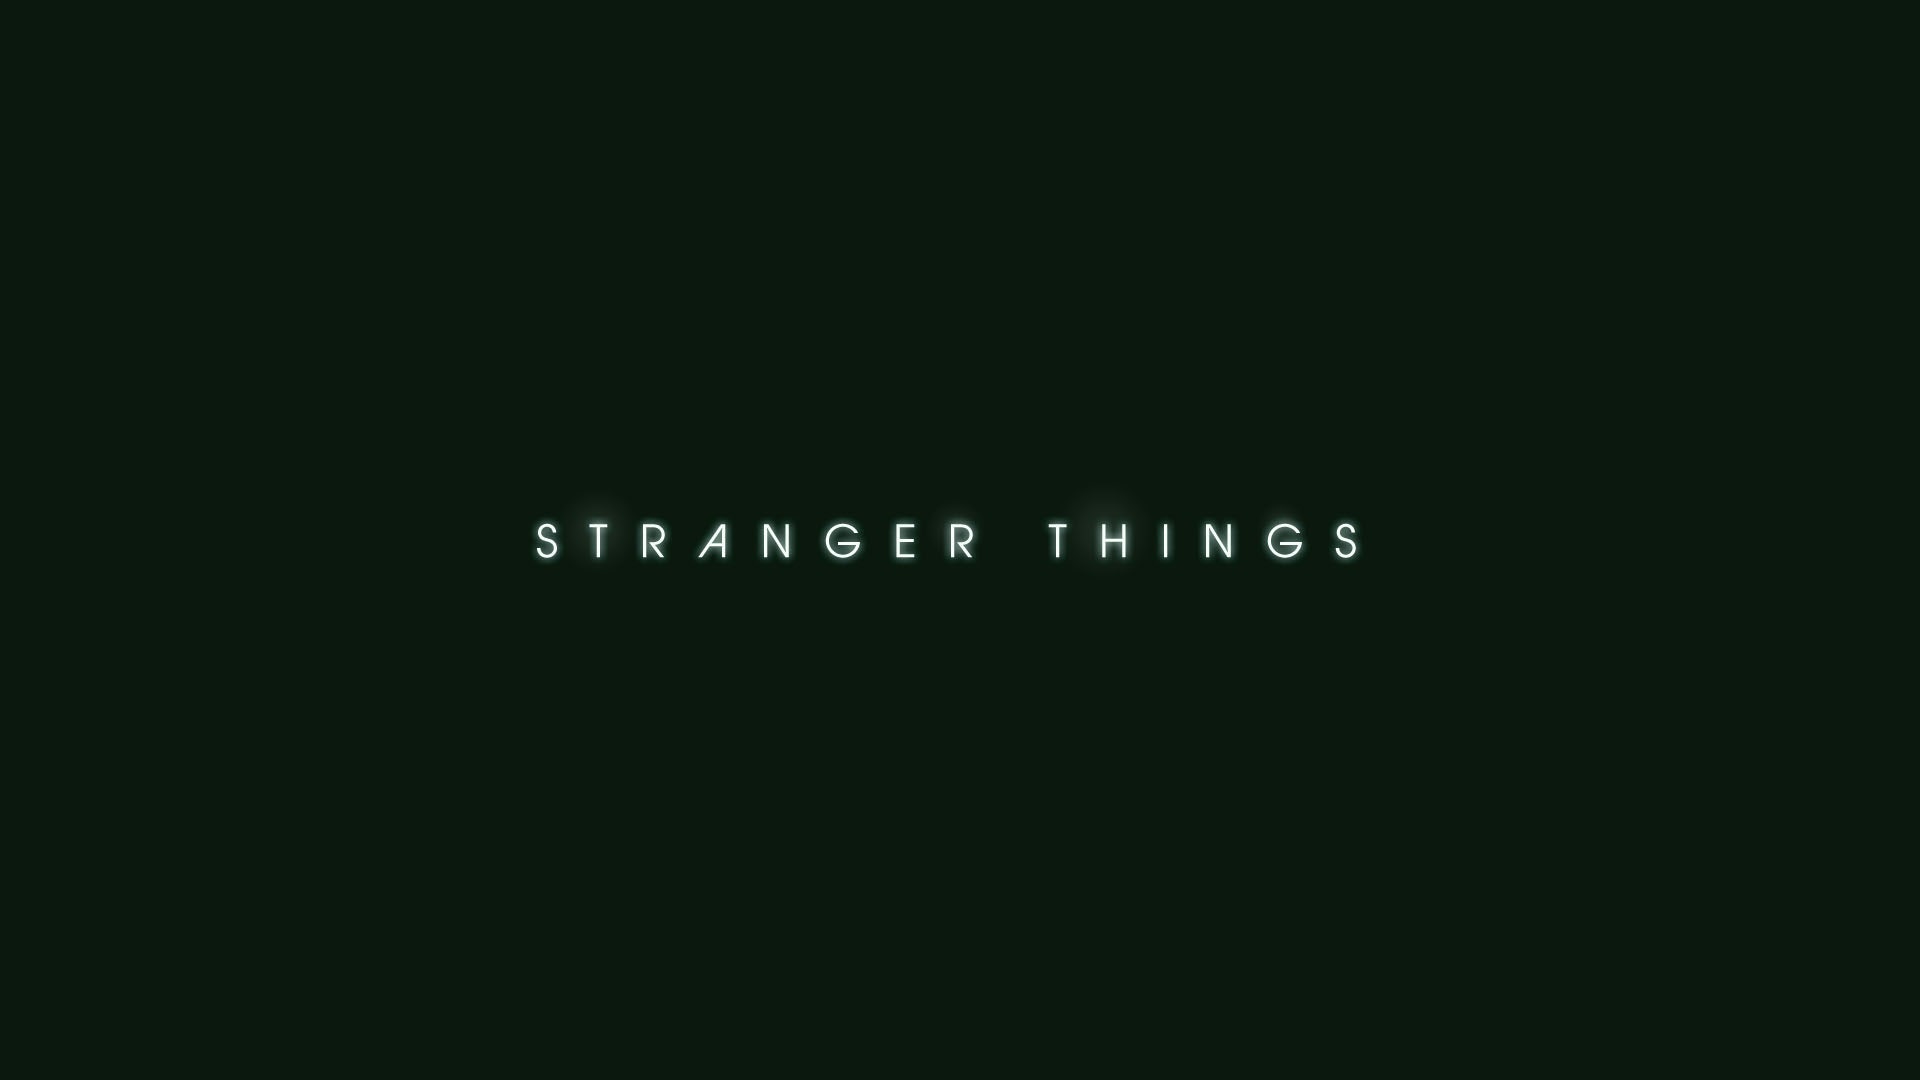 Stranger Things title card with a green background - Stranger Things